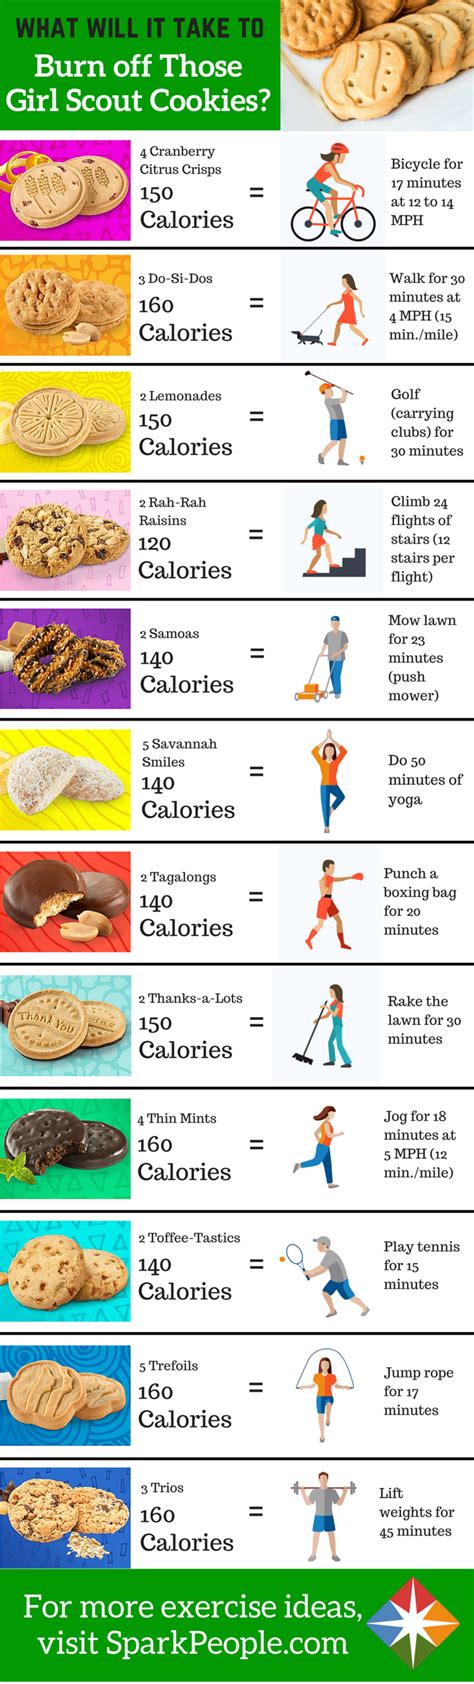 girl scout cookies nutritional information babes photo xxx